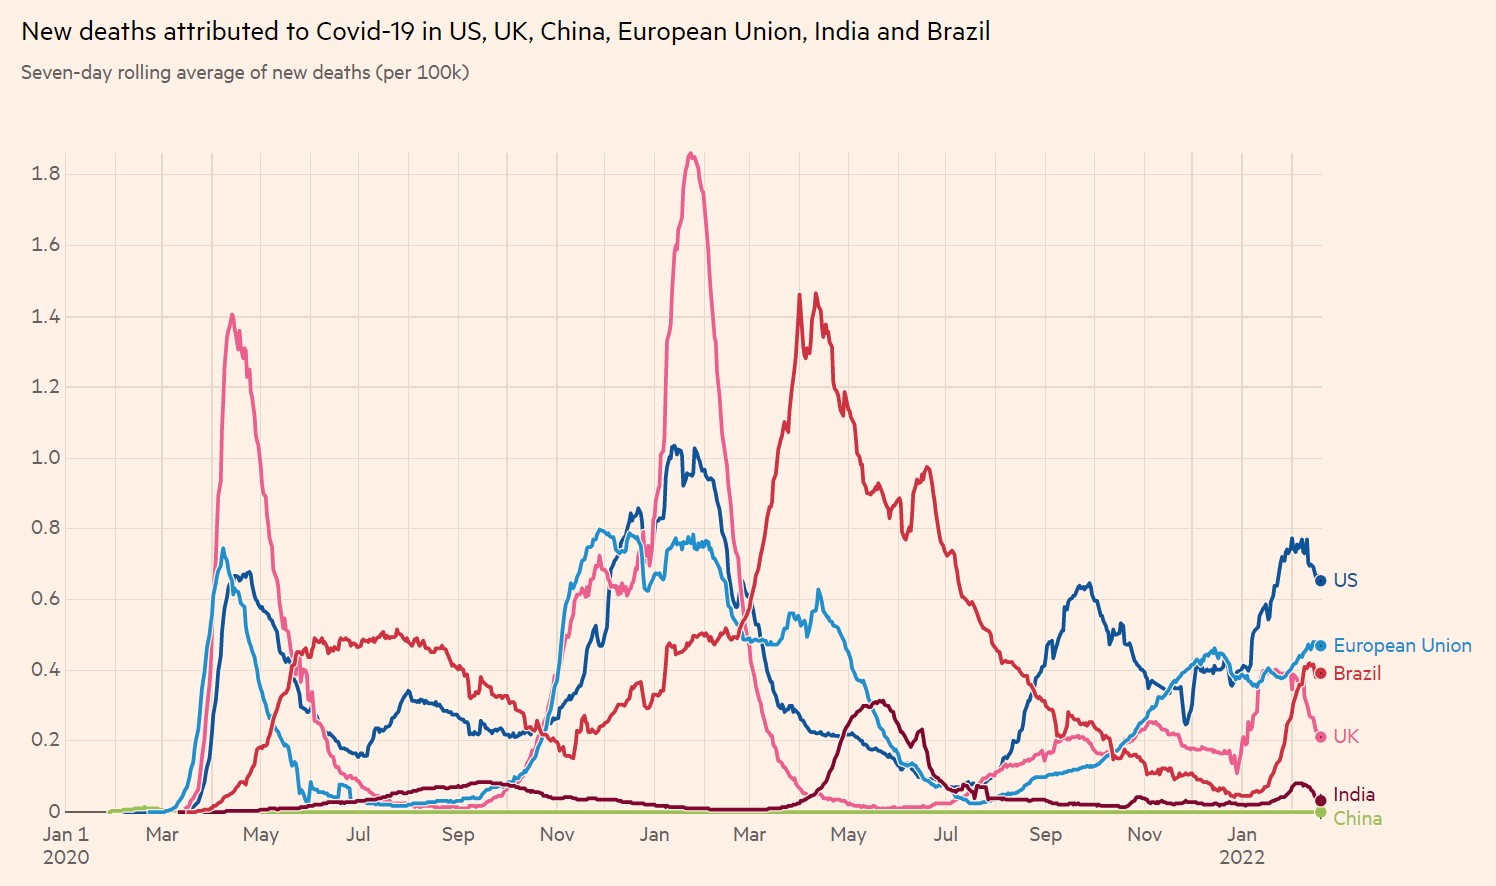 New deaths attributed to Covid-19 per 100k US UK China EU India Brazil 1-1-2020 to 20-2-2022 - enlarge